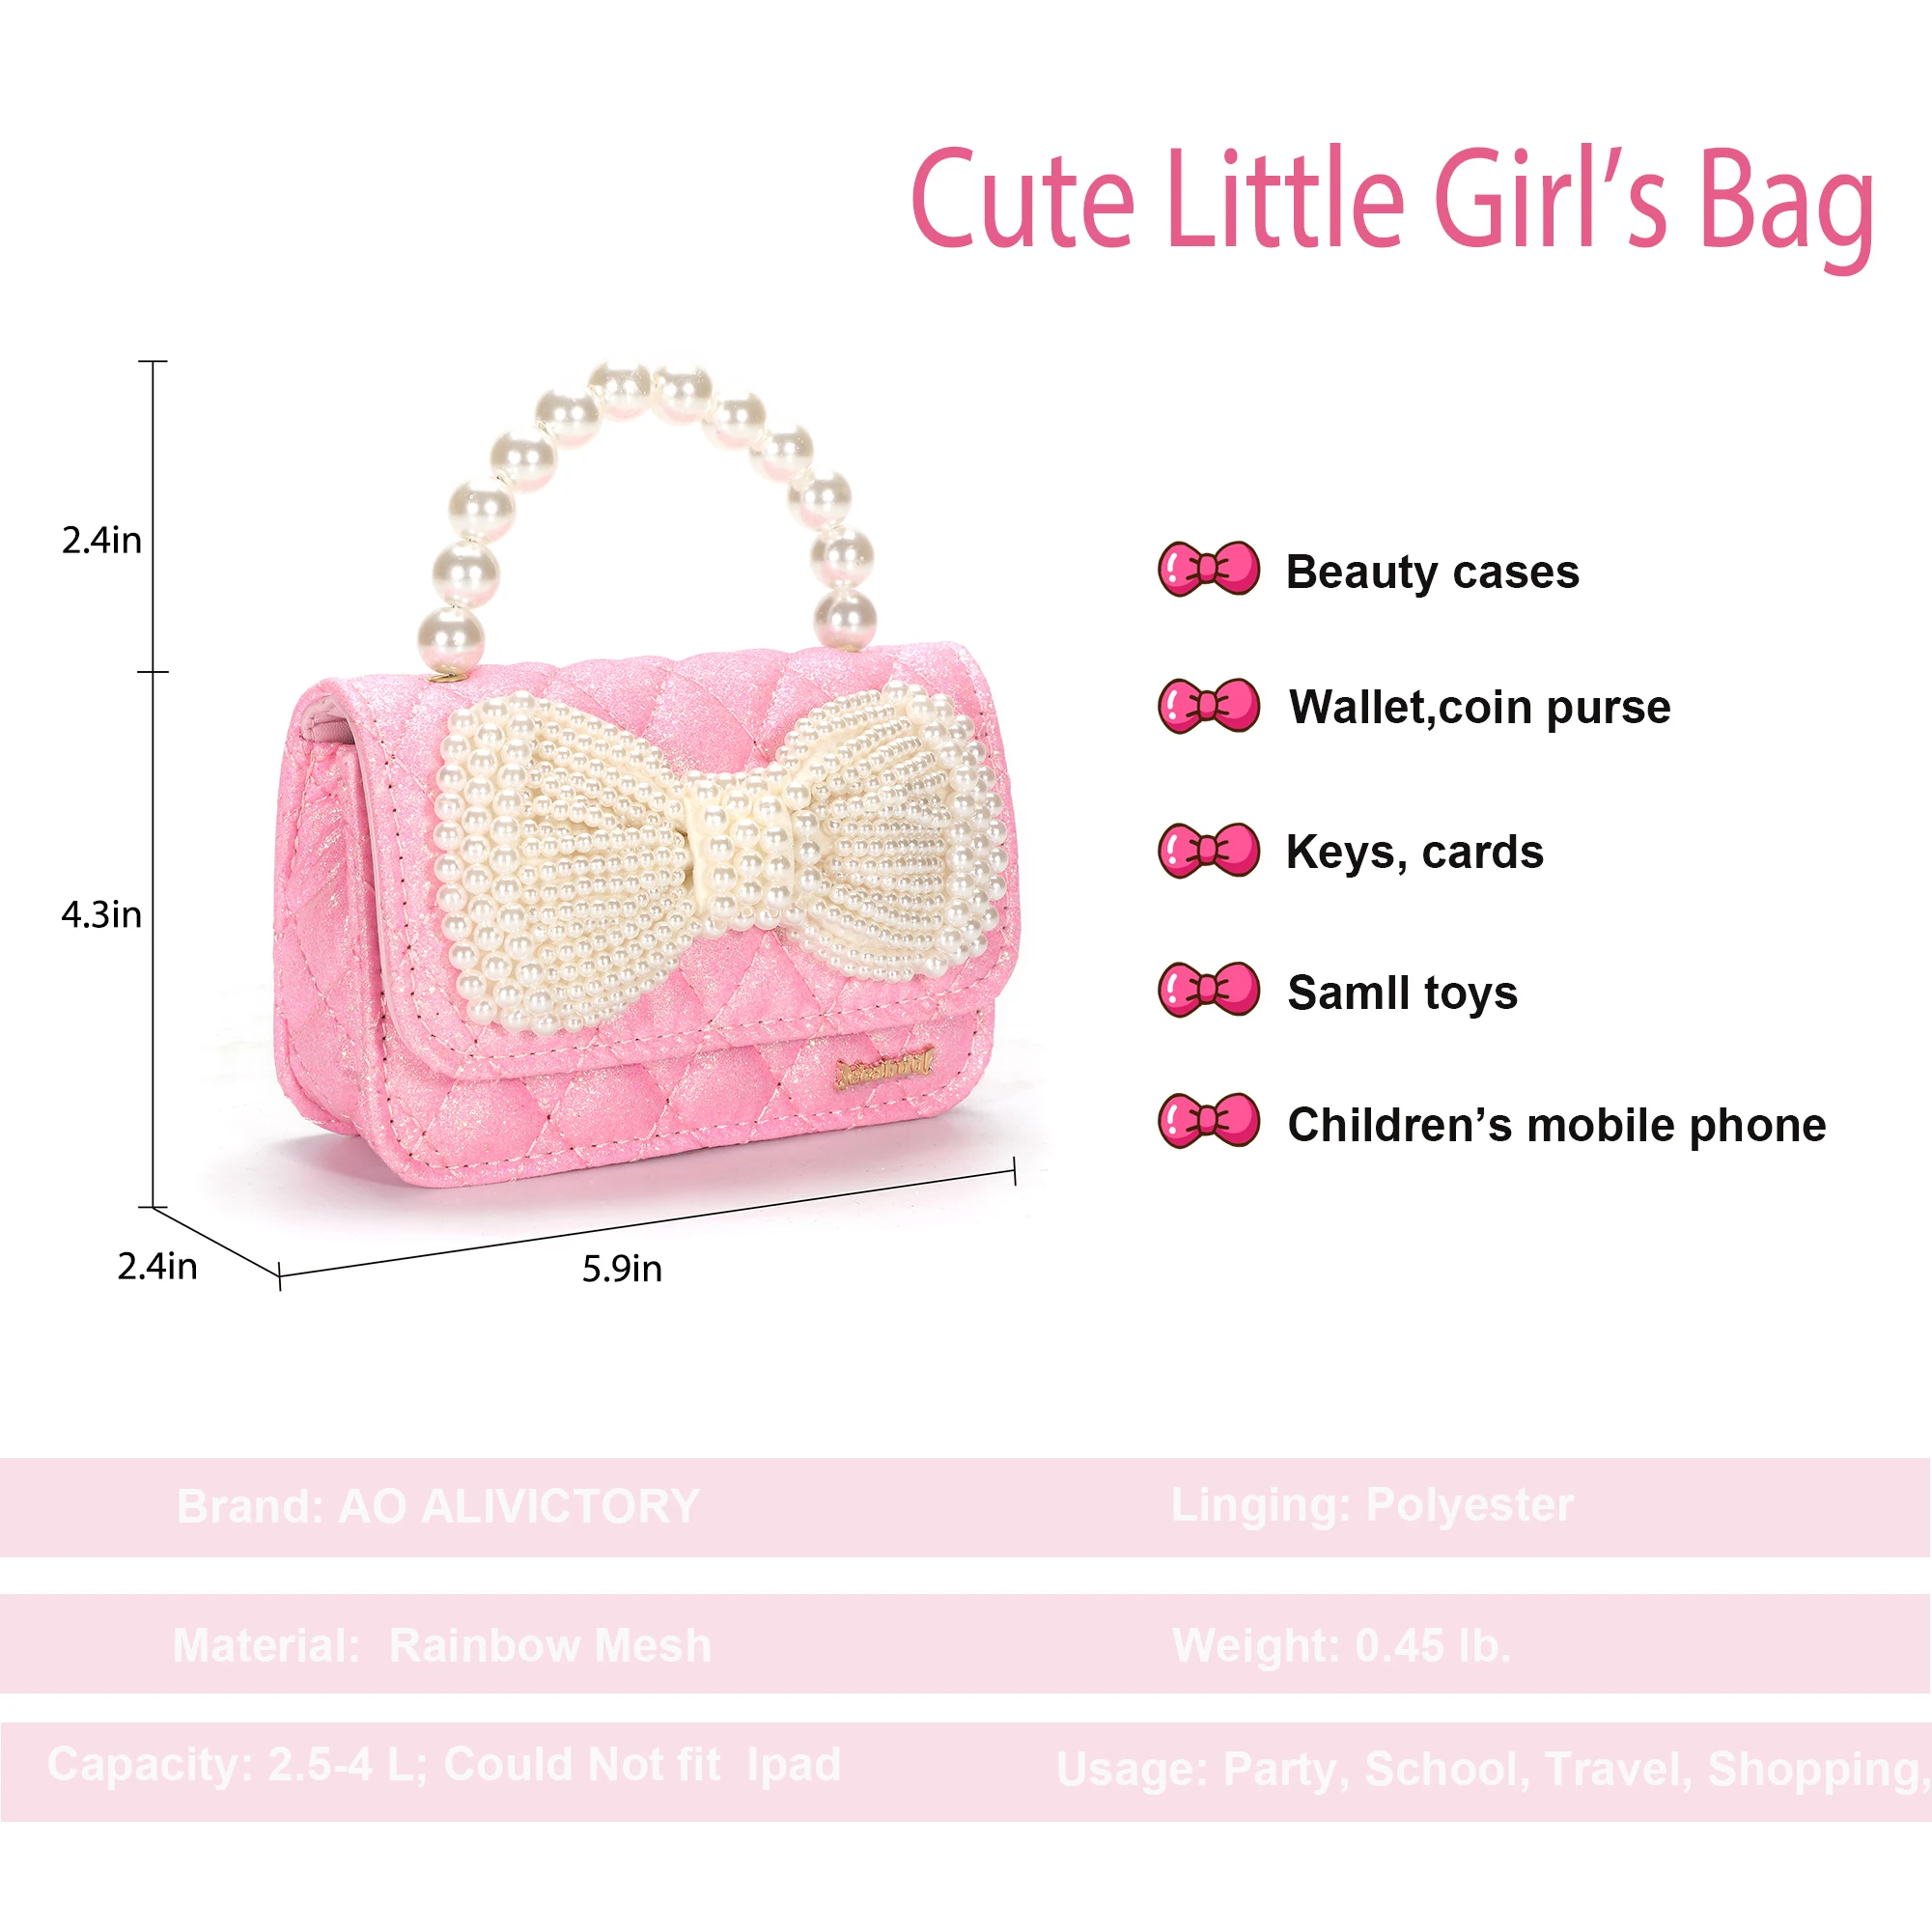 Pink AO ALI VICTORY Gifts for Little Girls Mini Kids Purses Baby Glitter Bow Handbags Small Toddler Crossbody Bags 